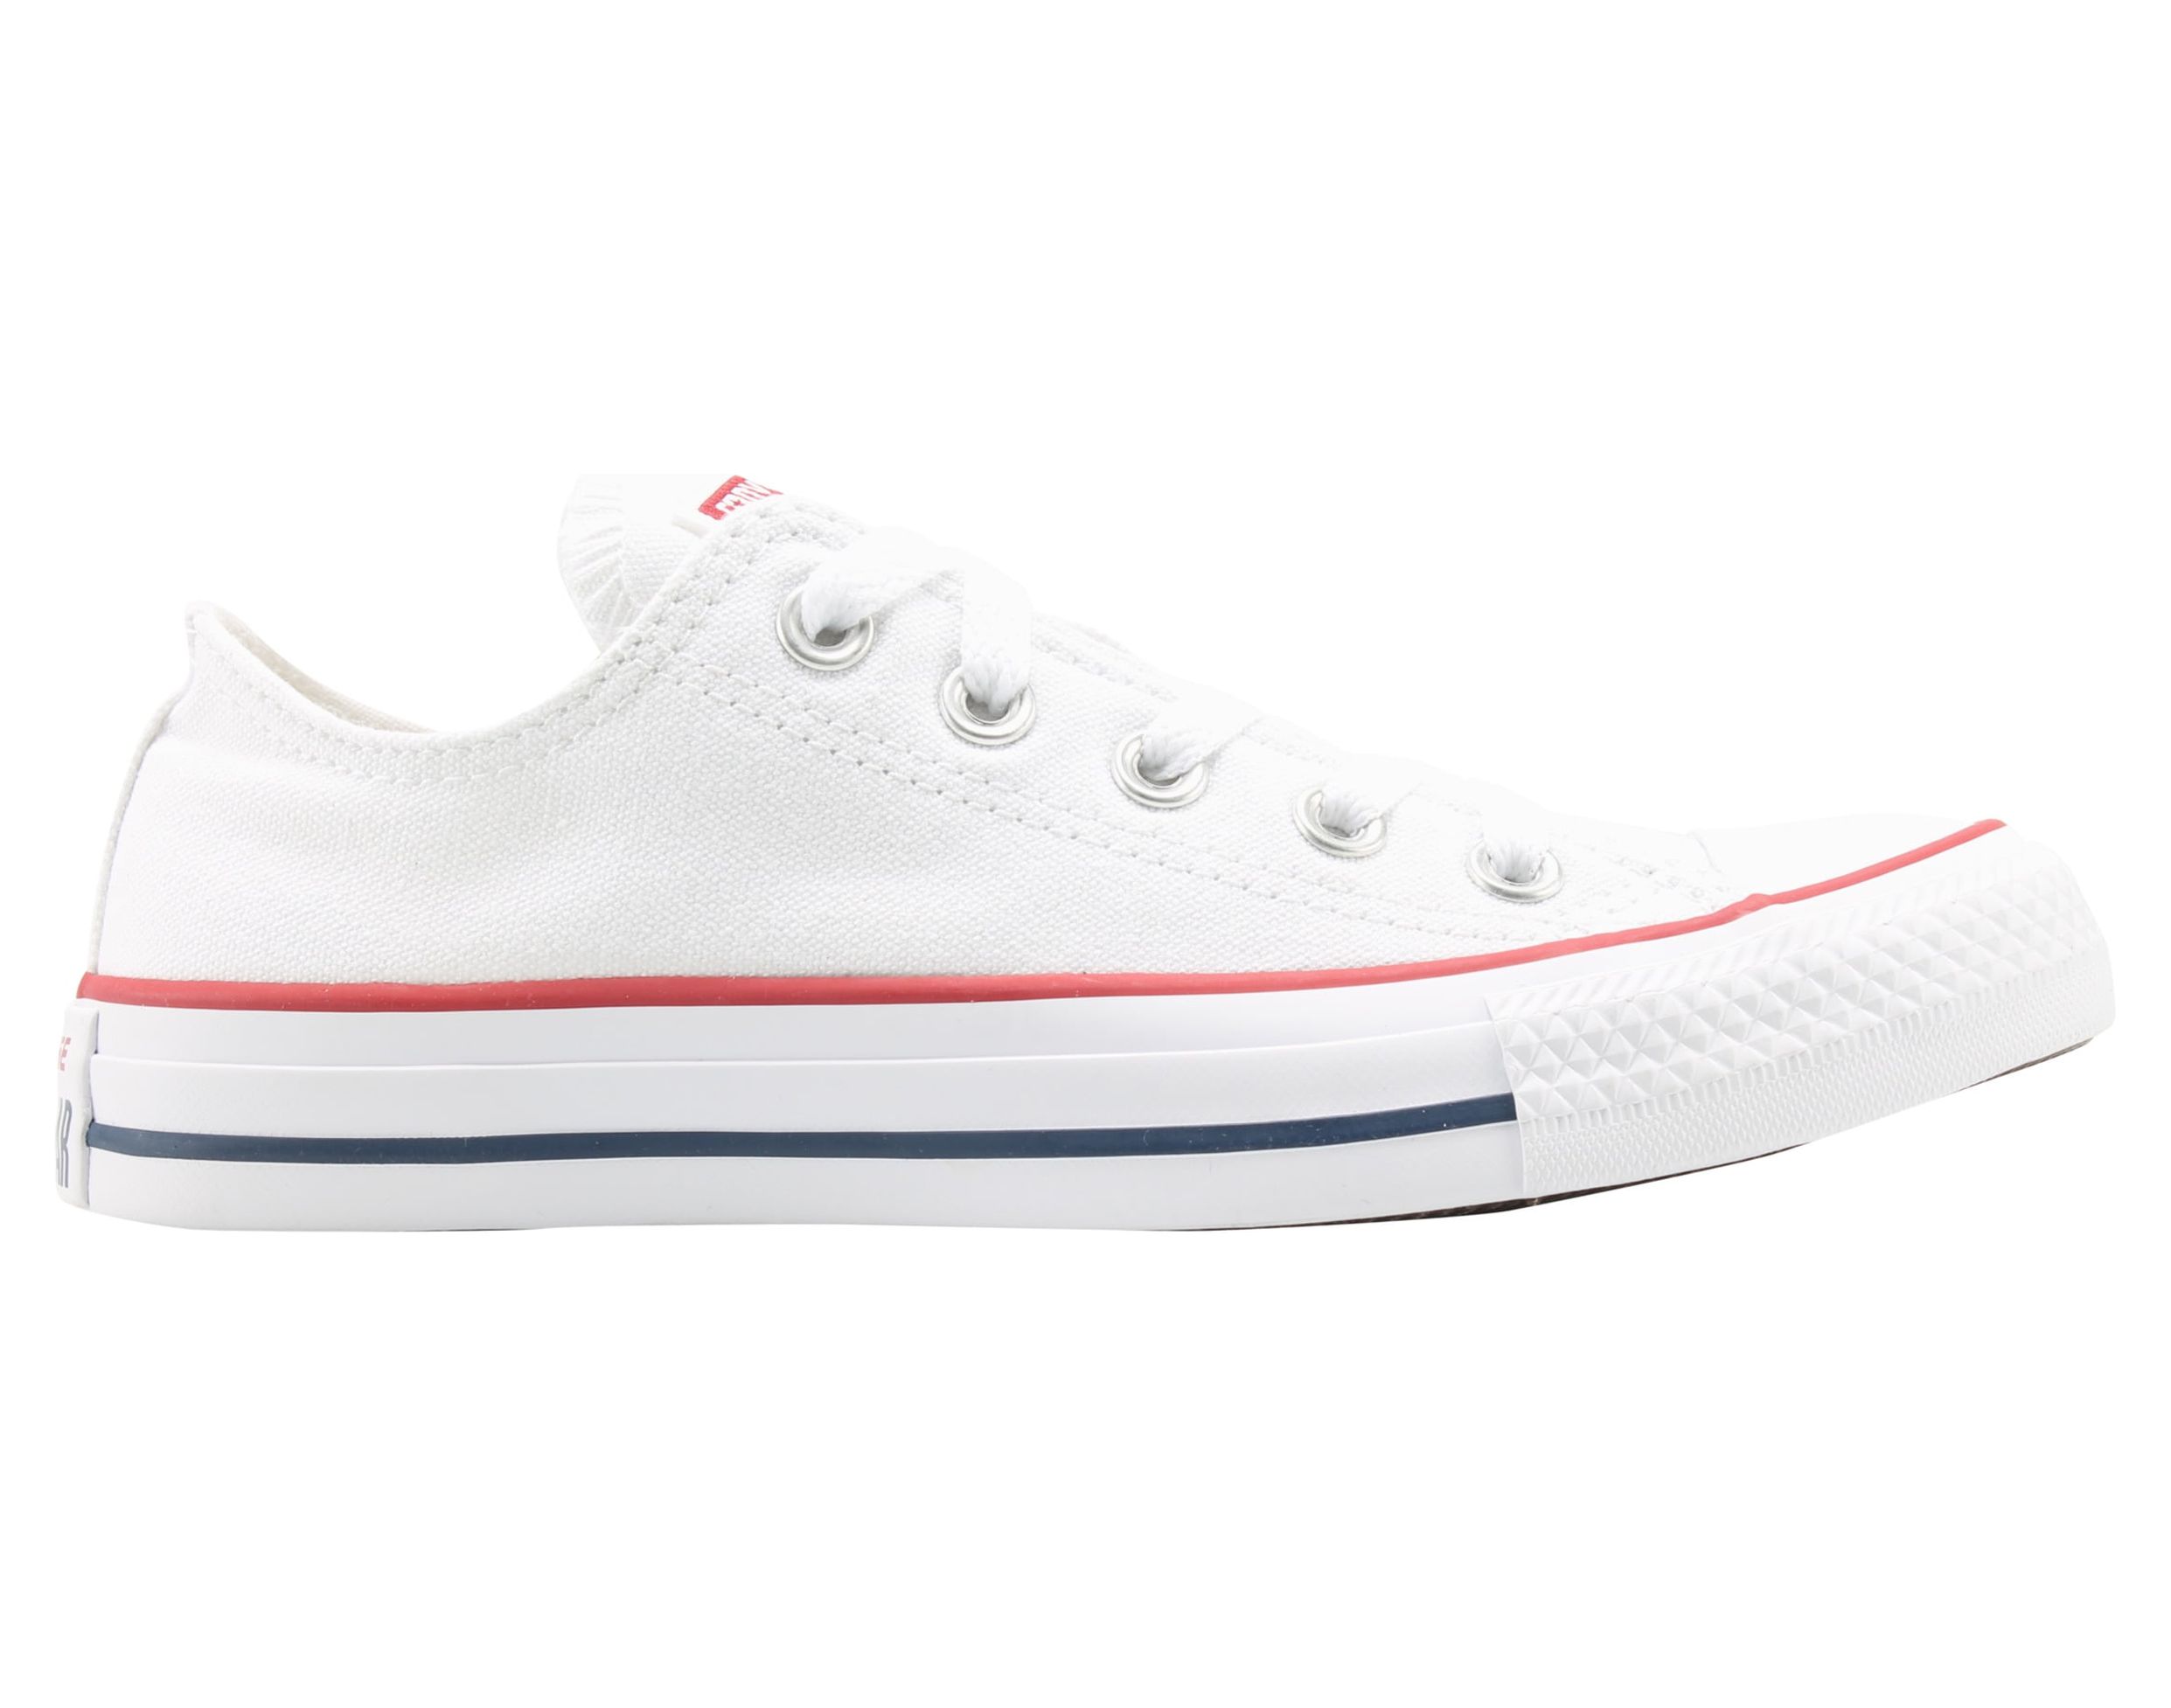 Converse M7652 / M7652C Chuck Taylor All Star Low Top Canvas Optical White - image 2 of 6